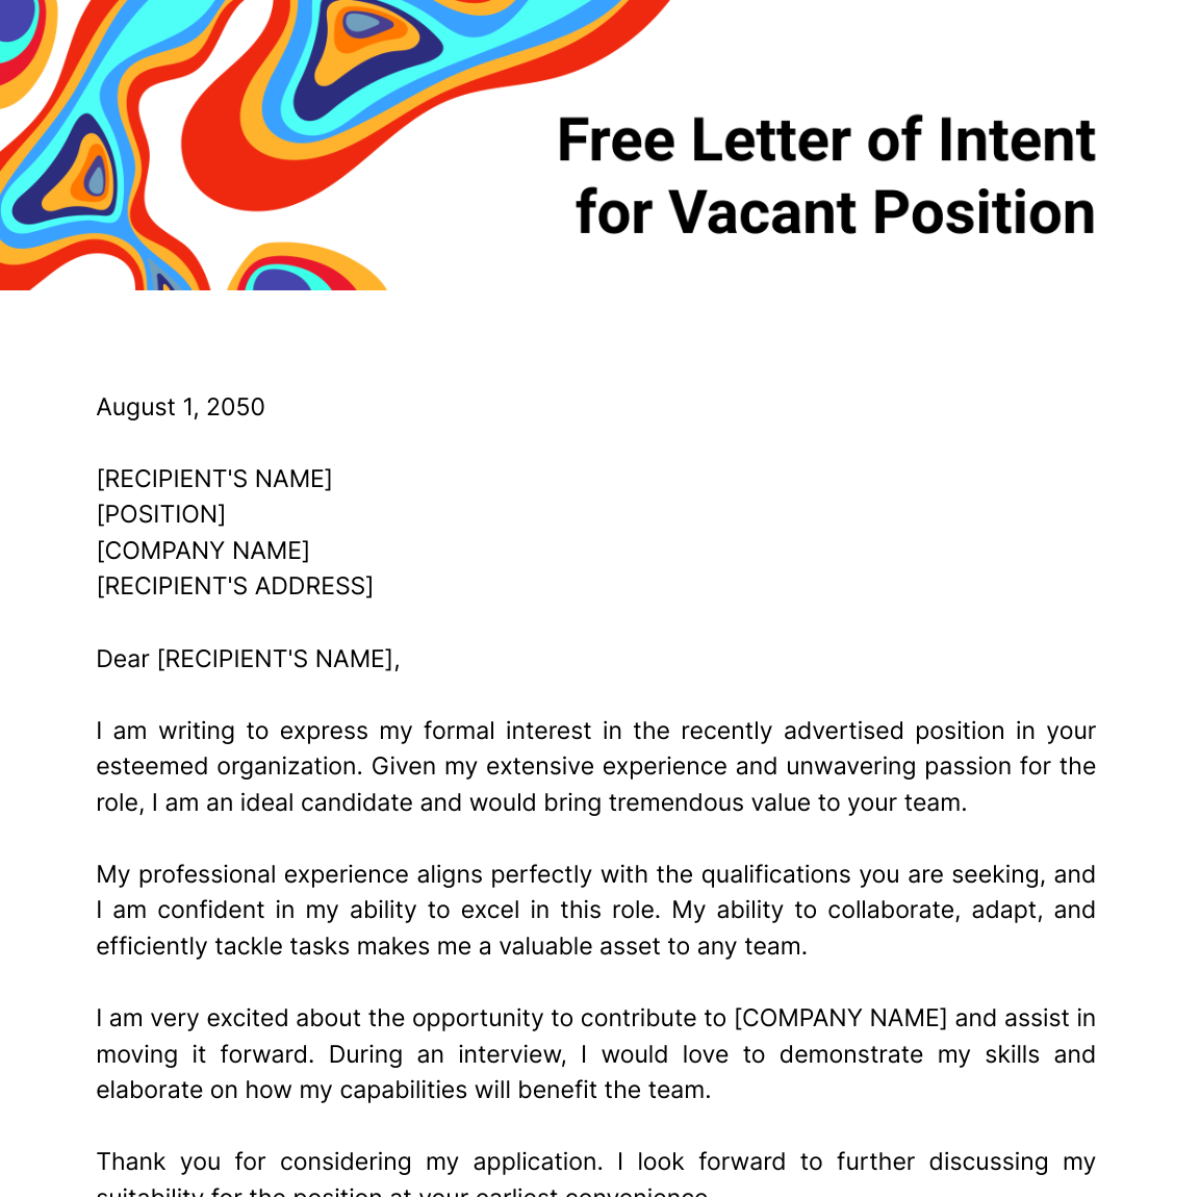 Letter of Intent for Vacant Position Template